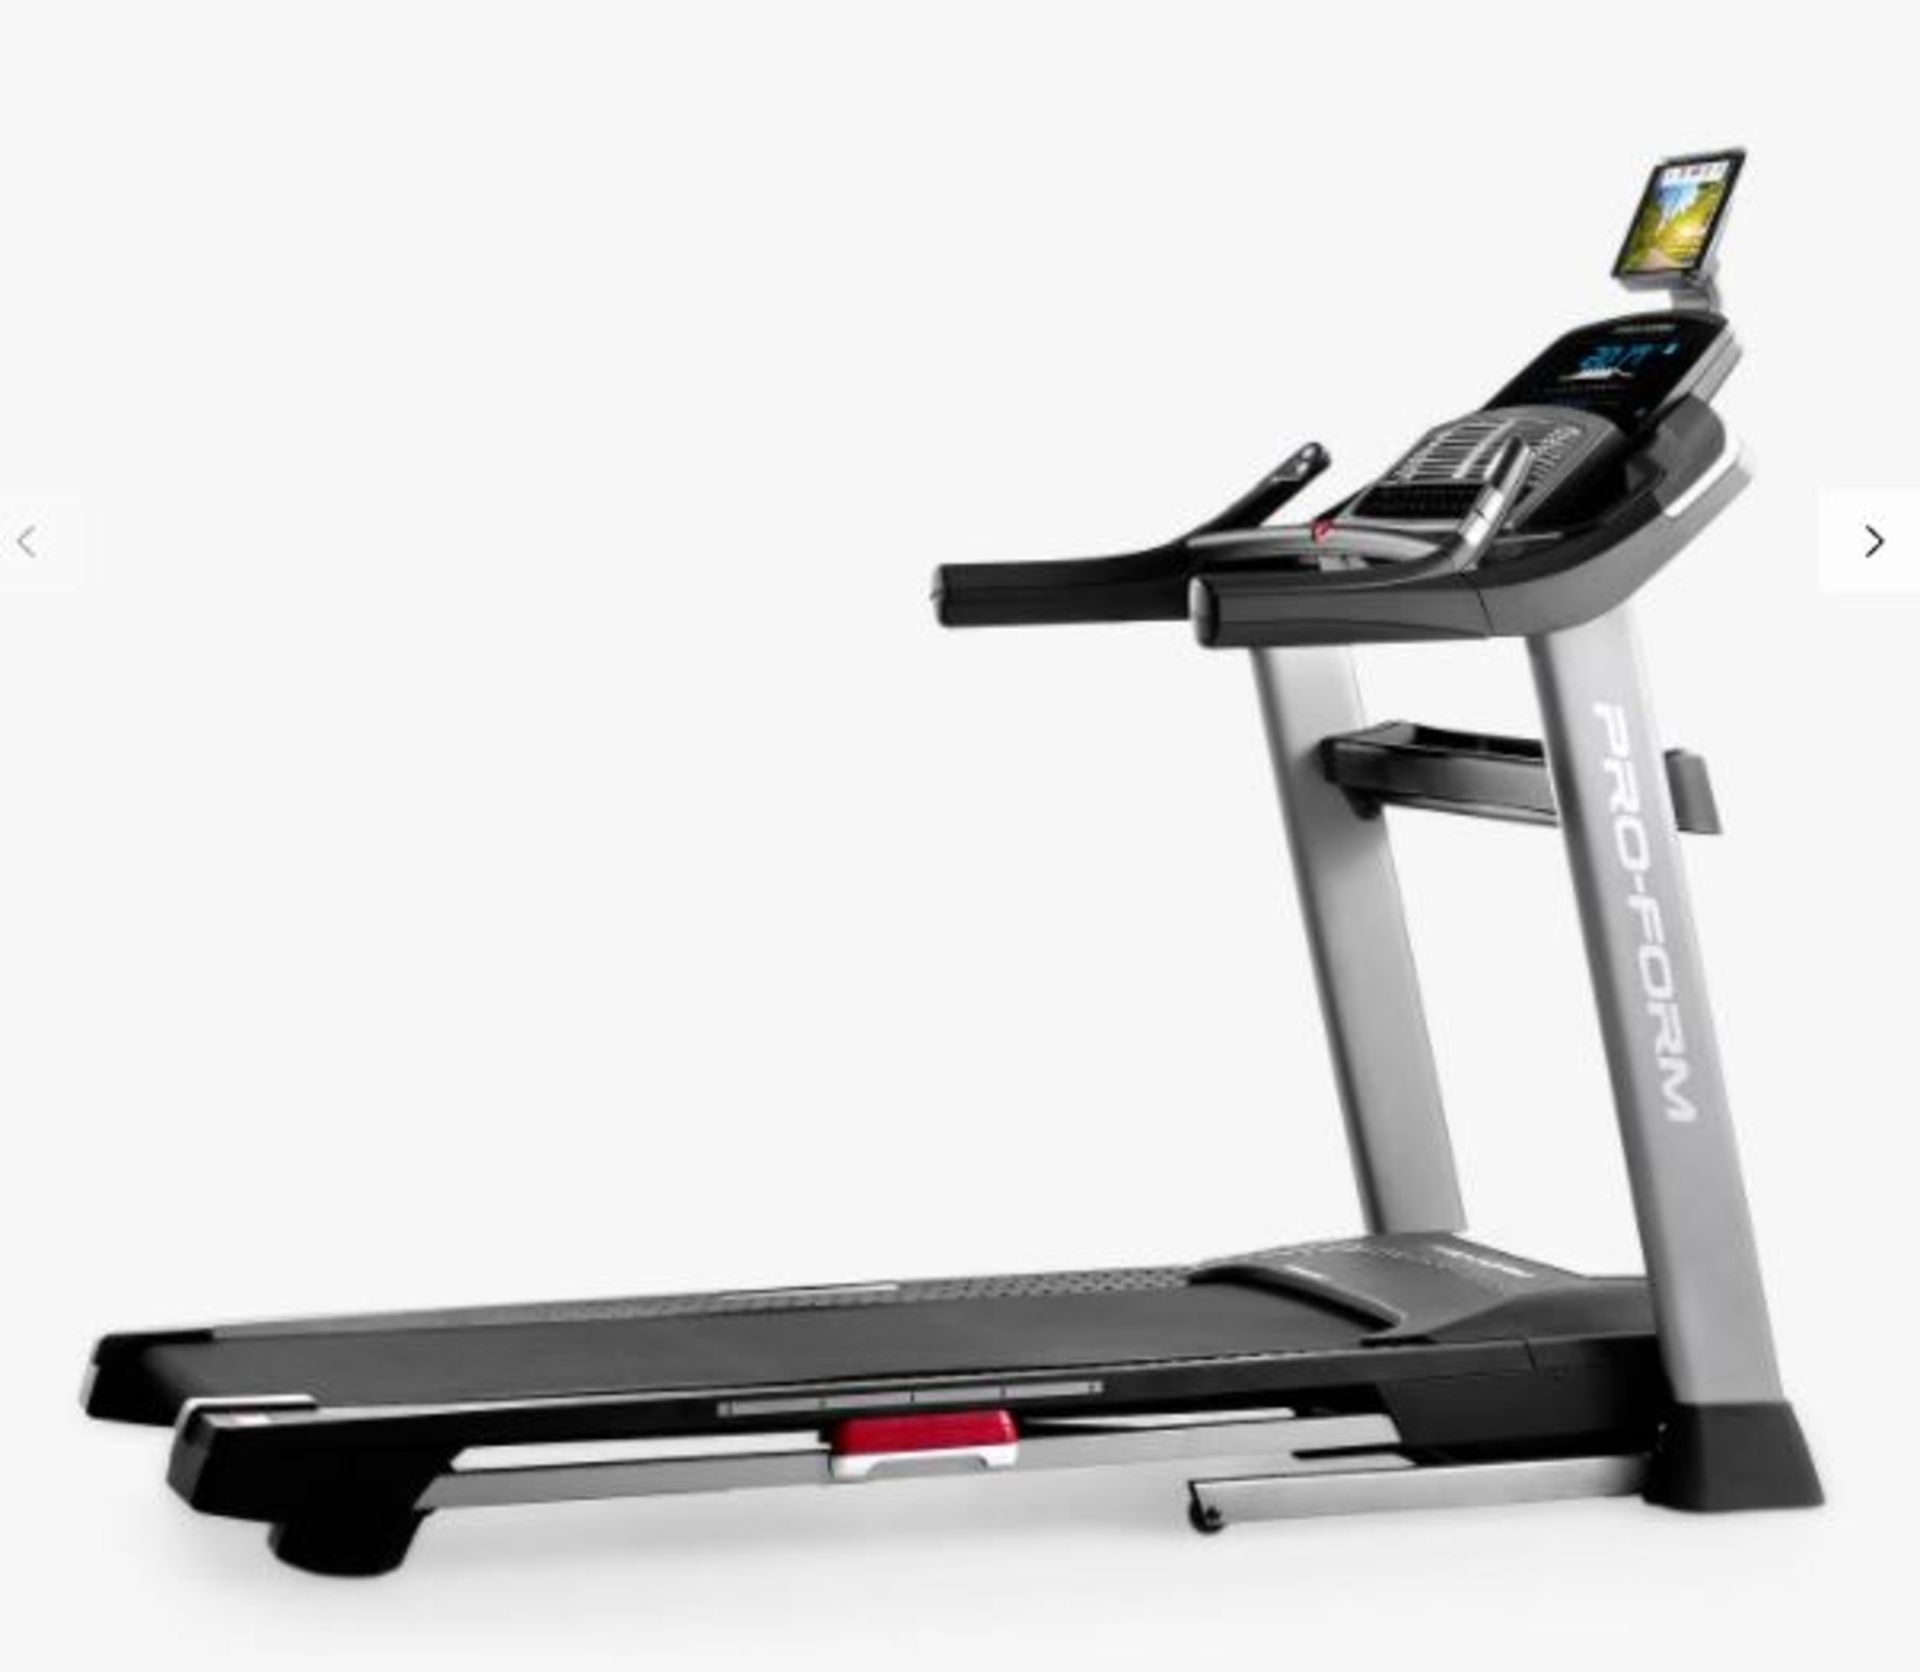 1 PROFORM PRO 1000 TREADMILL WITH LED DISPLAY AND 3.0 CHP MACH Z COMMERCIAL MOTOR RRP Â£1099 (LIKE